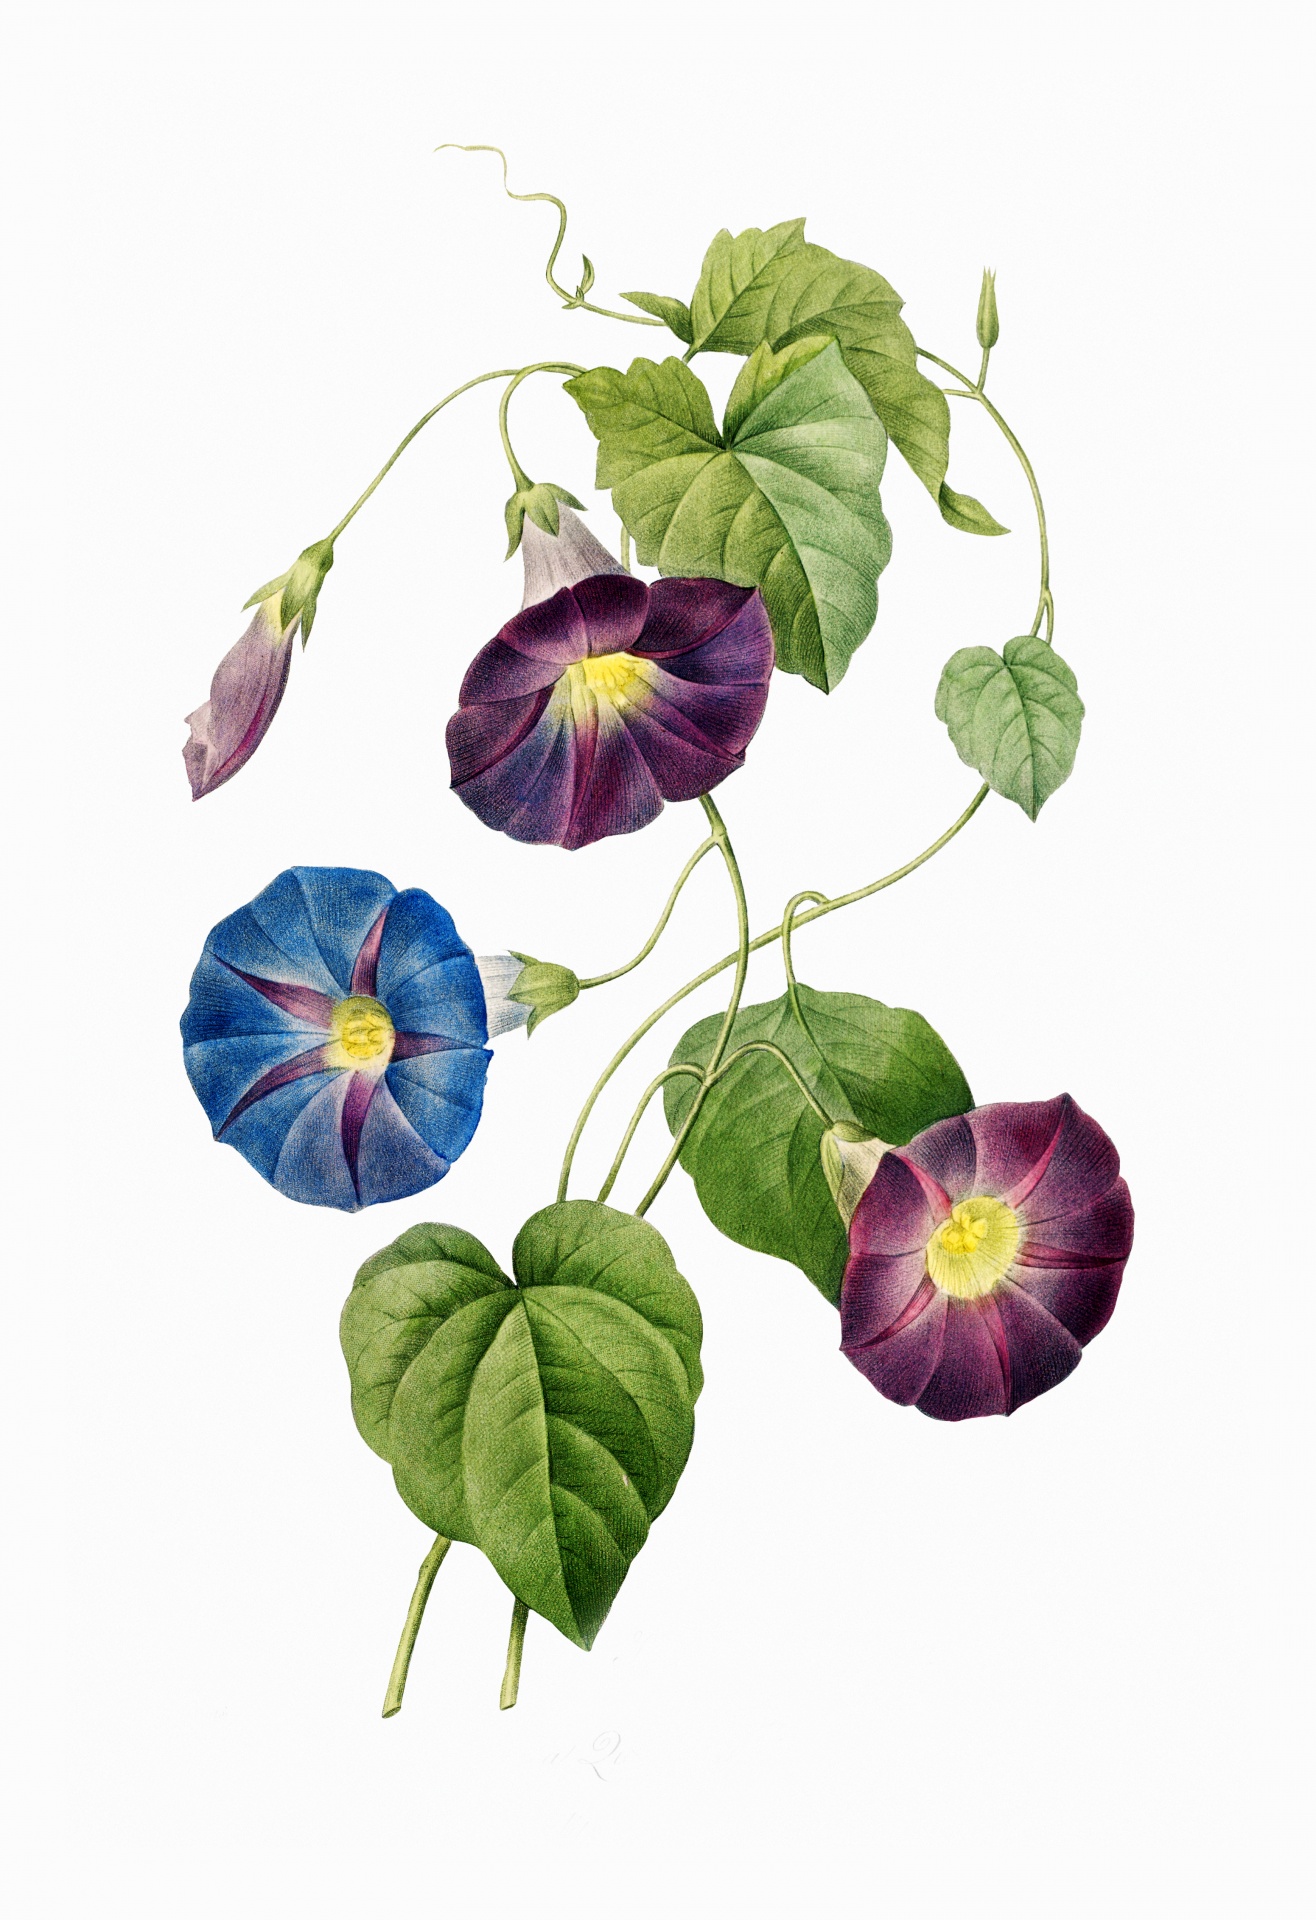 Morning glory in different colors flower wildflower blossom vintage art watercolor watercolors painting creative